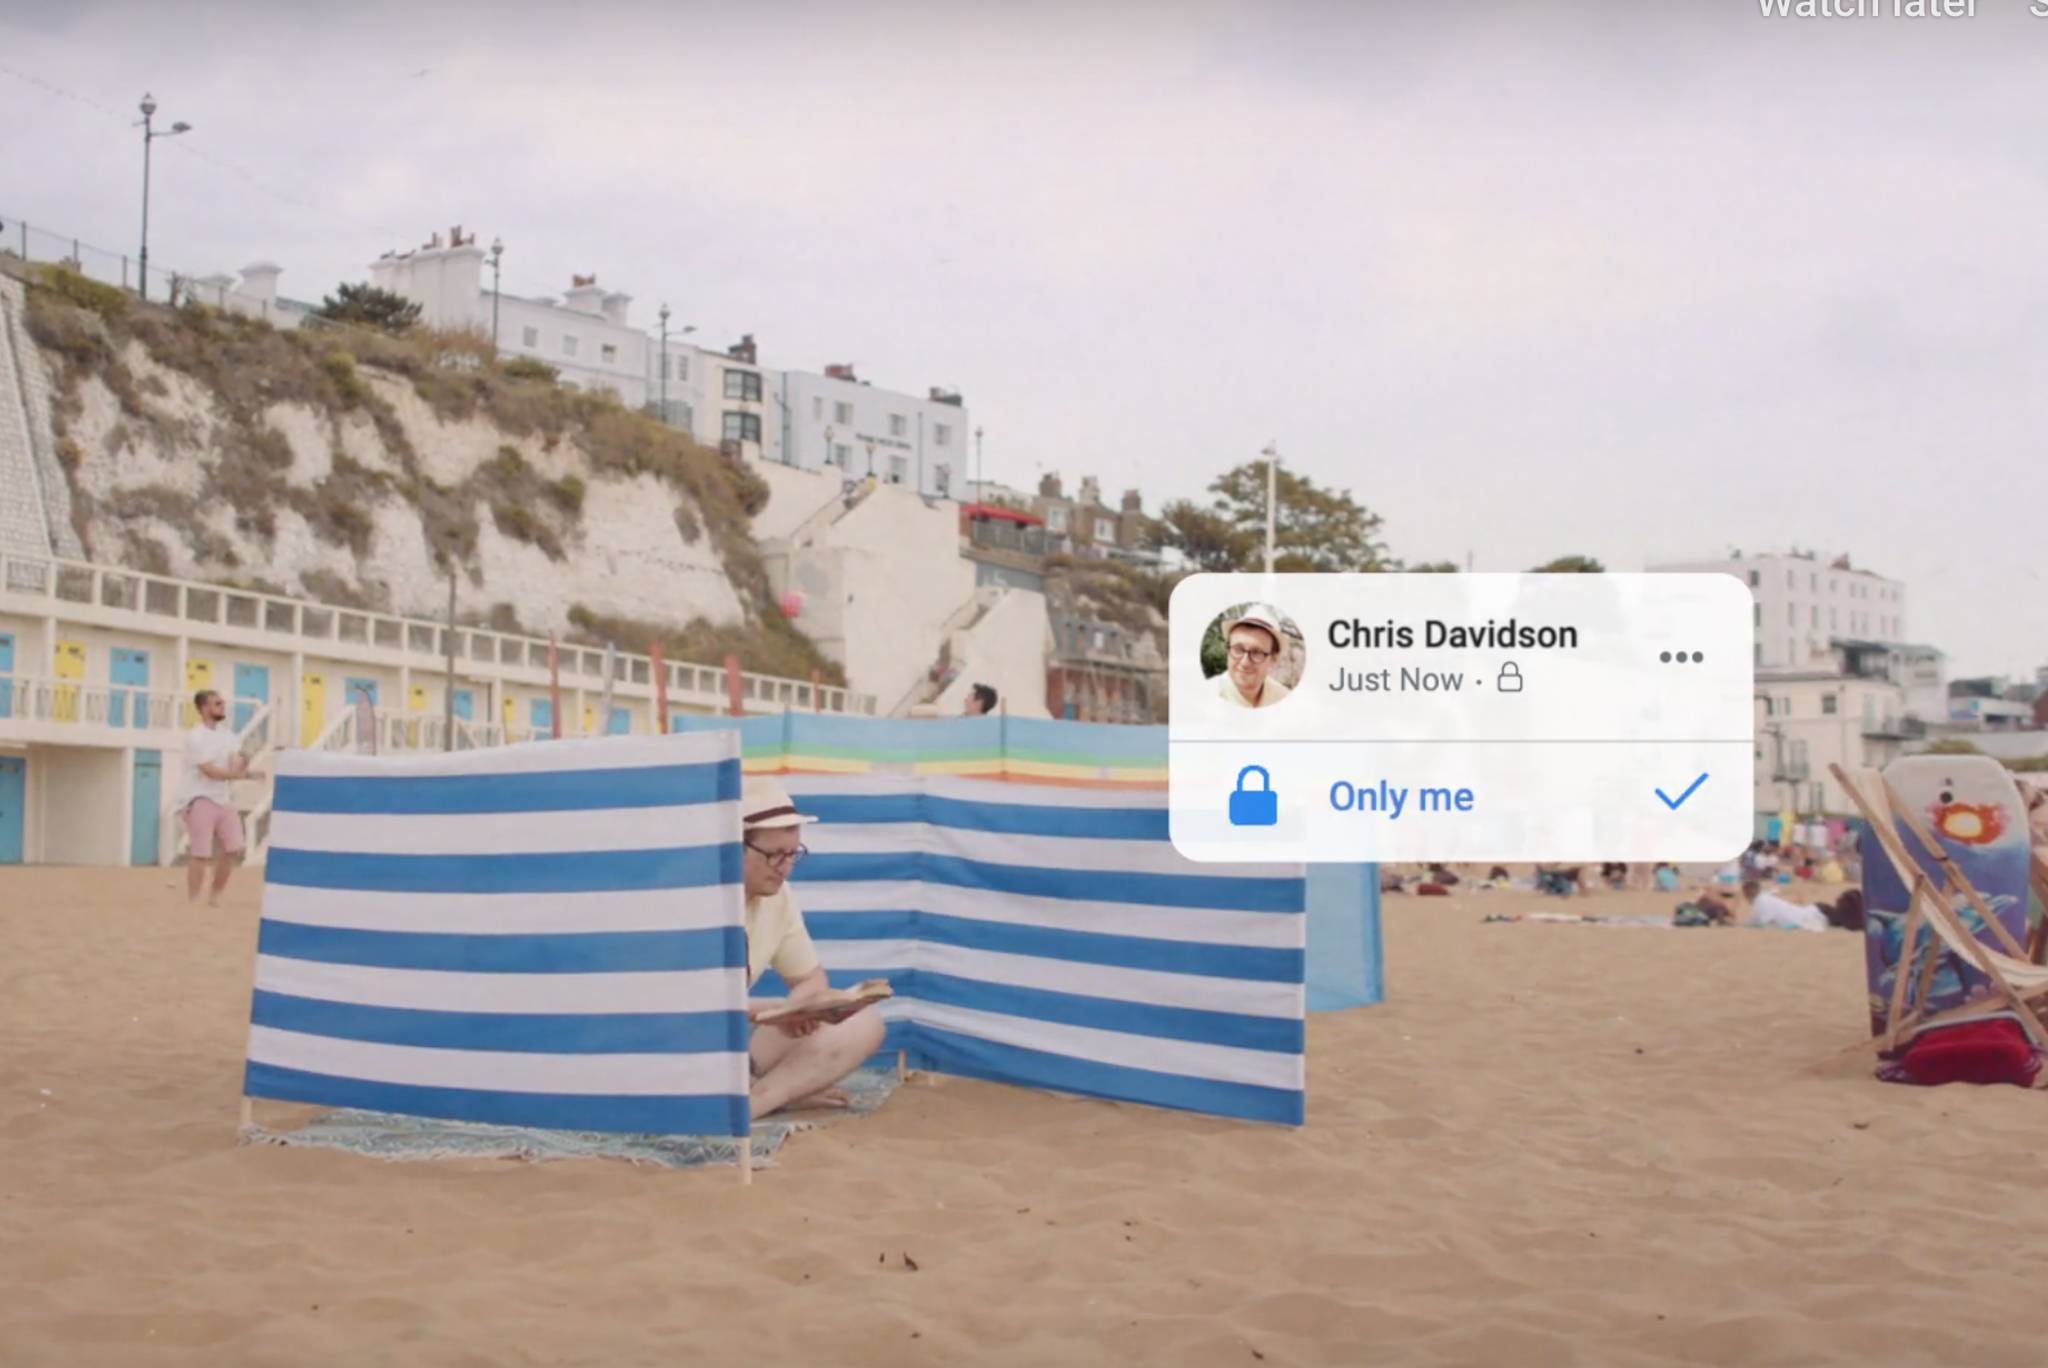 Facebook ad aims to educate Britons on digital privacy